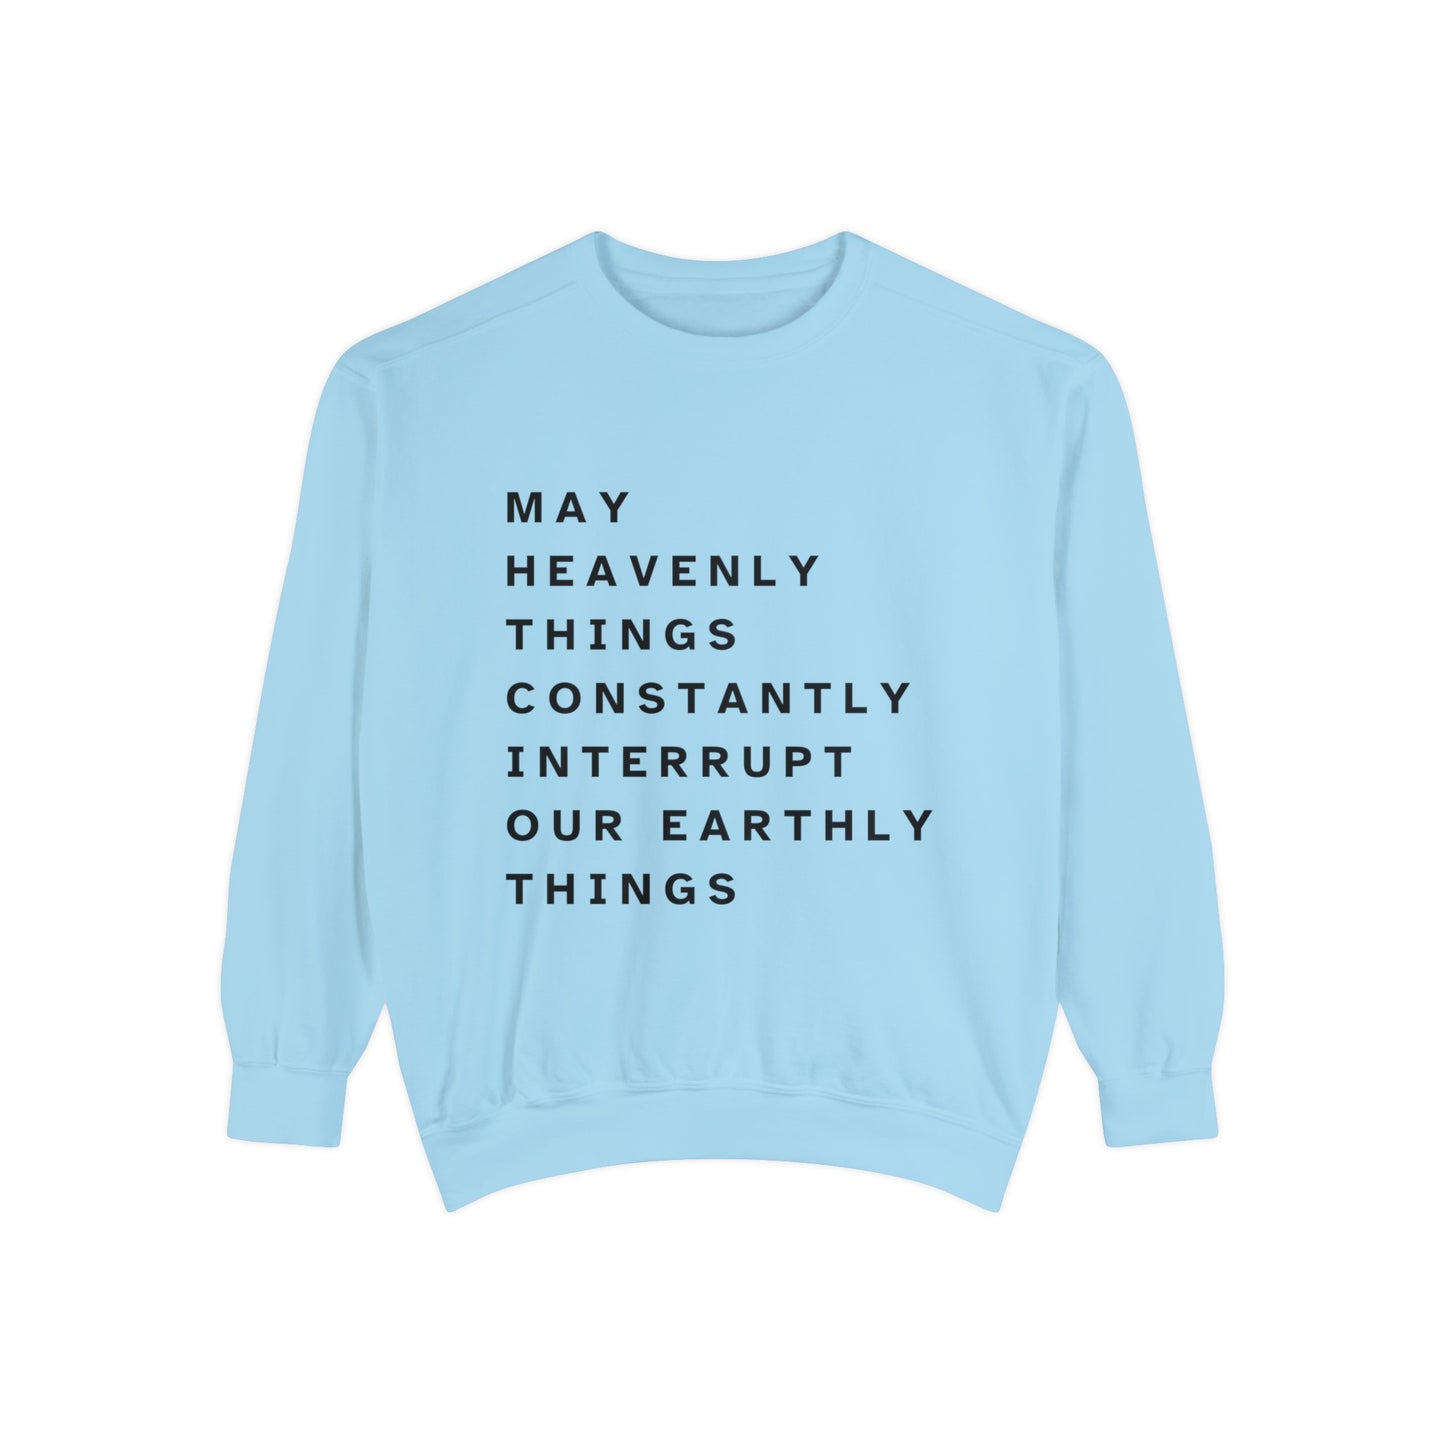 May Heavenly Things Constantly Interrupt Earthly Things Unisex Garment-Dyed Sweatshirt